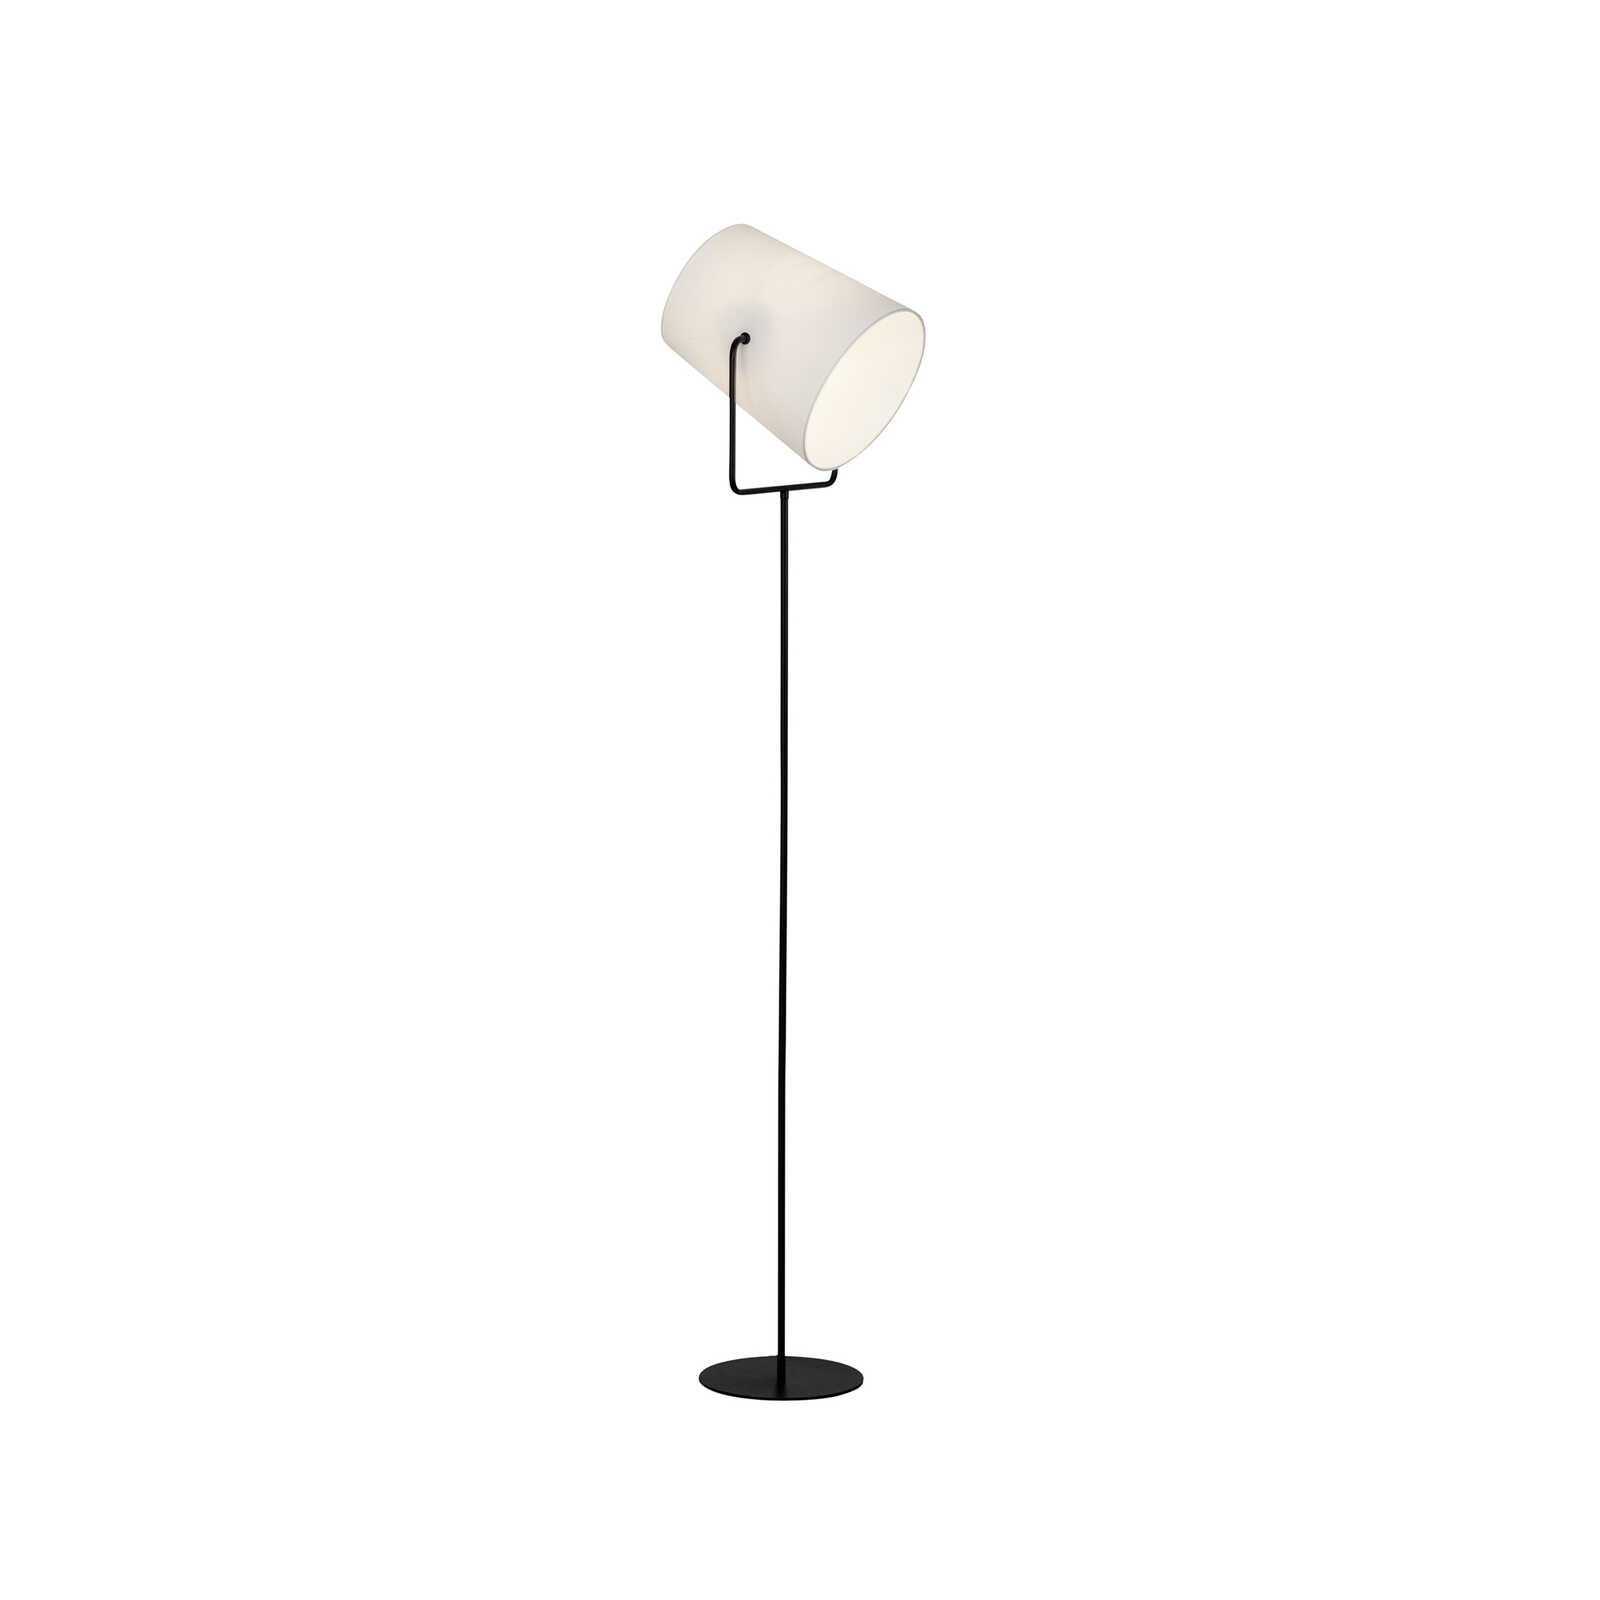 Floor lamp made of textile - Collin - Black
